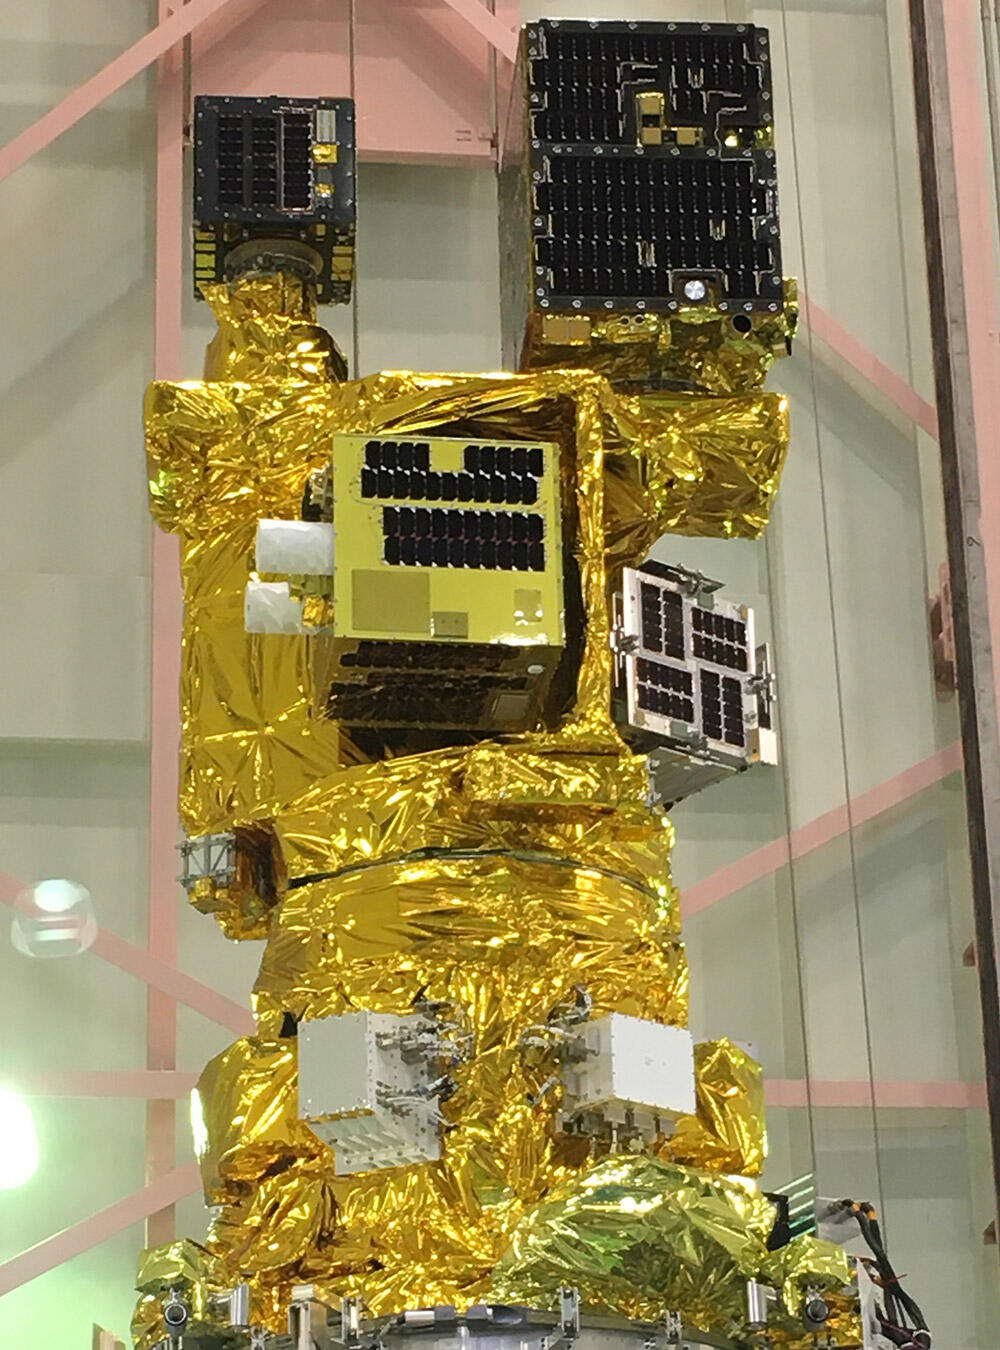 Configuration of Innovative Satellite Technology Demonstration-2: RApid Innovative payload demonstration satellitE 2 (RAISE-2), which carries six components, and a total of eight microsatellites and CubeSats